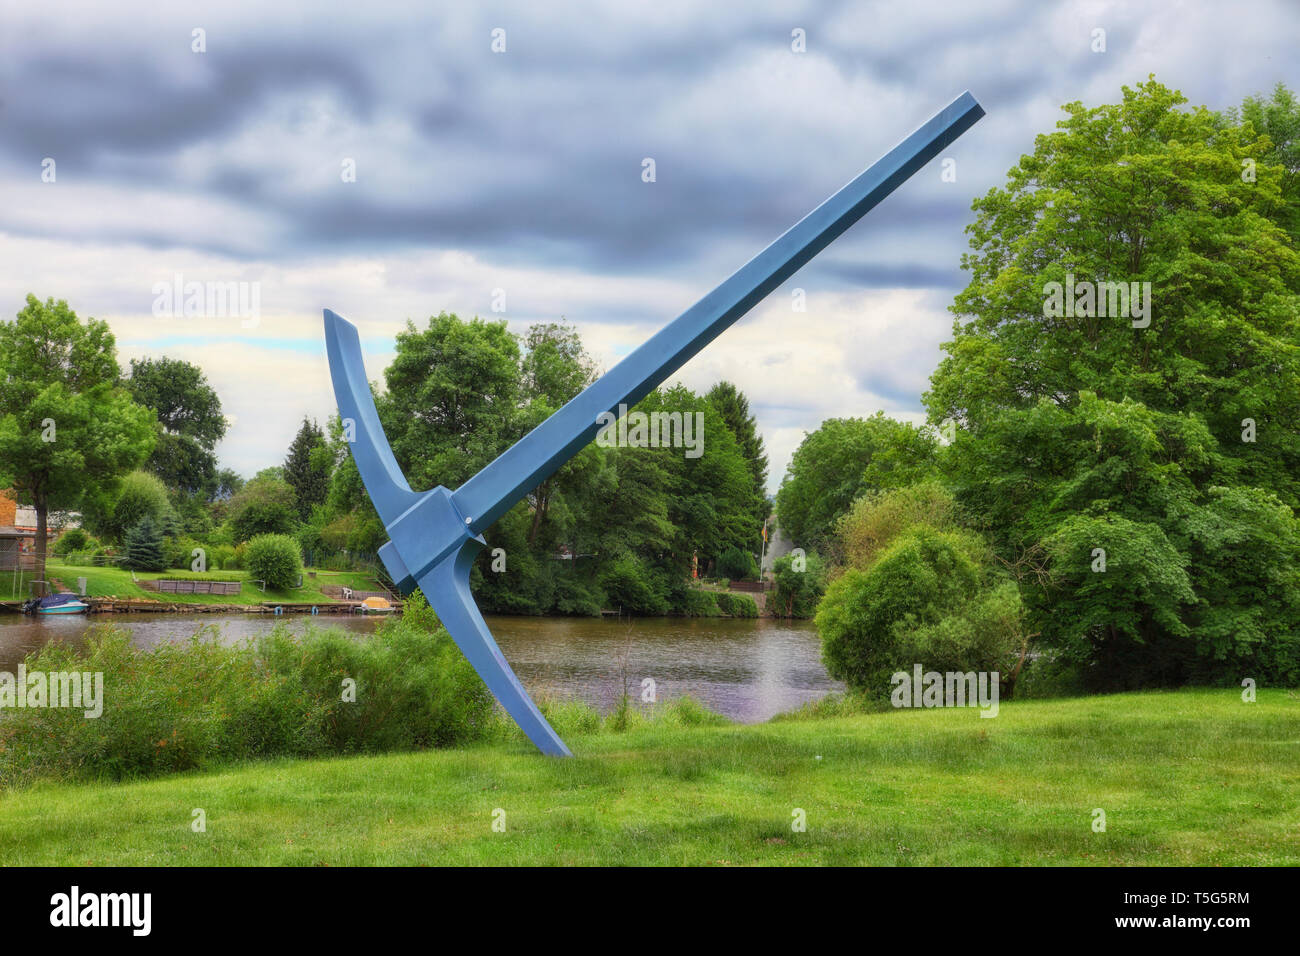 Huge pick axe in front of a river Stock Photo